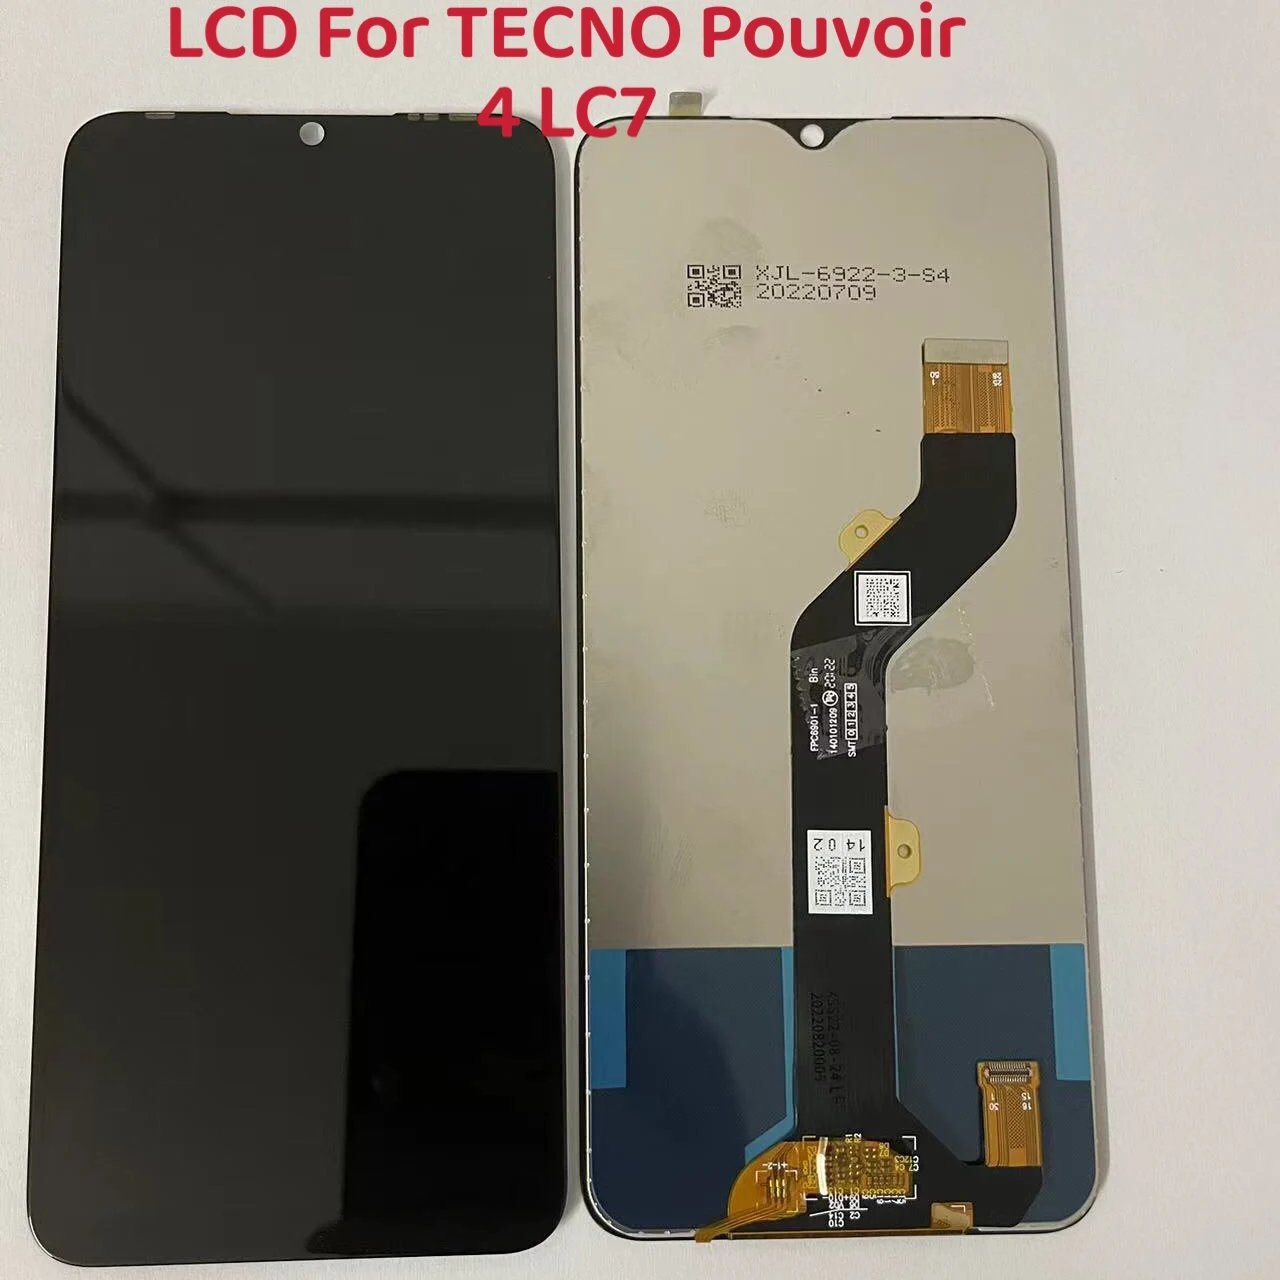 

10 PCS/Lot 100% Original 7.0" LCD Pantalla For Tecno Pouvoir 4 LC7 LCD With Sensor Touch Screen Panel Digitizer Full Assembly